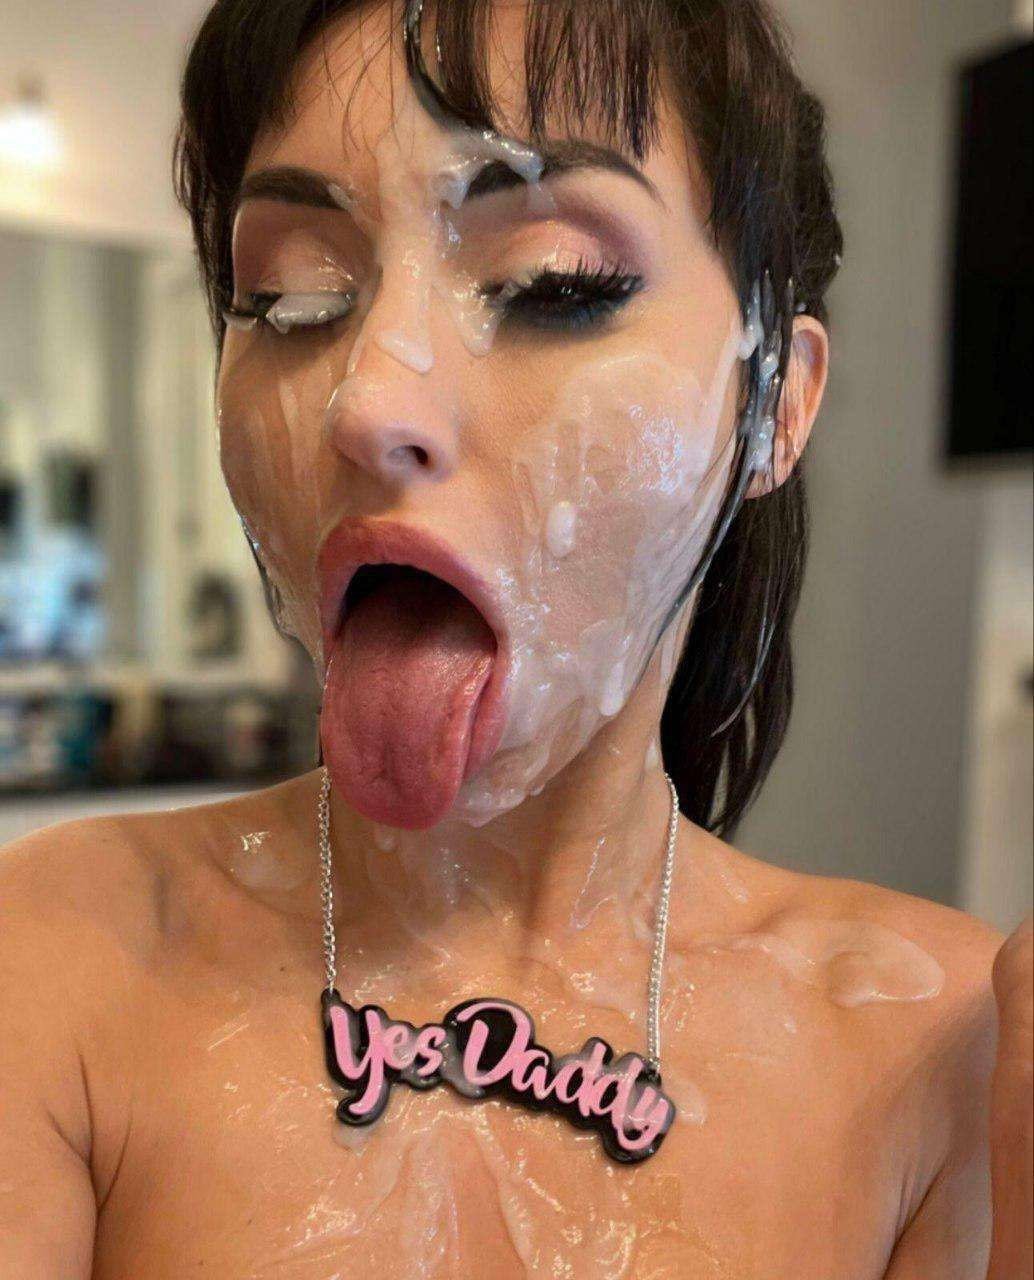 Watch the Photo by Ruinedcarpet with the username @Ruinedcarpet, posted on November 3, 2023 and the text says '#Cum #Cute #Babe #Porn #Sex #Hot #Thot #Milk #Tongue #CumSlut #Cutie #Sperm #Semen #Cumshot #Facial #Hottie #Cuteness #Selfie'